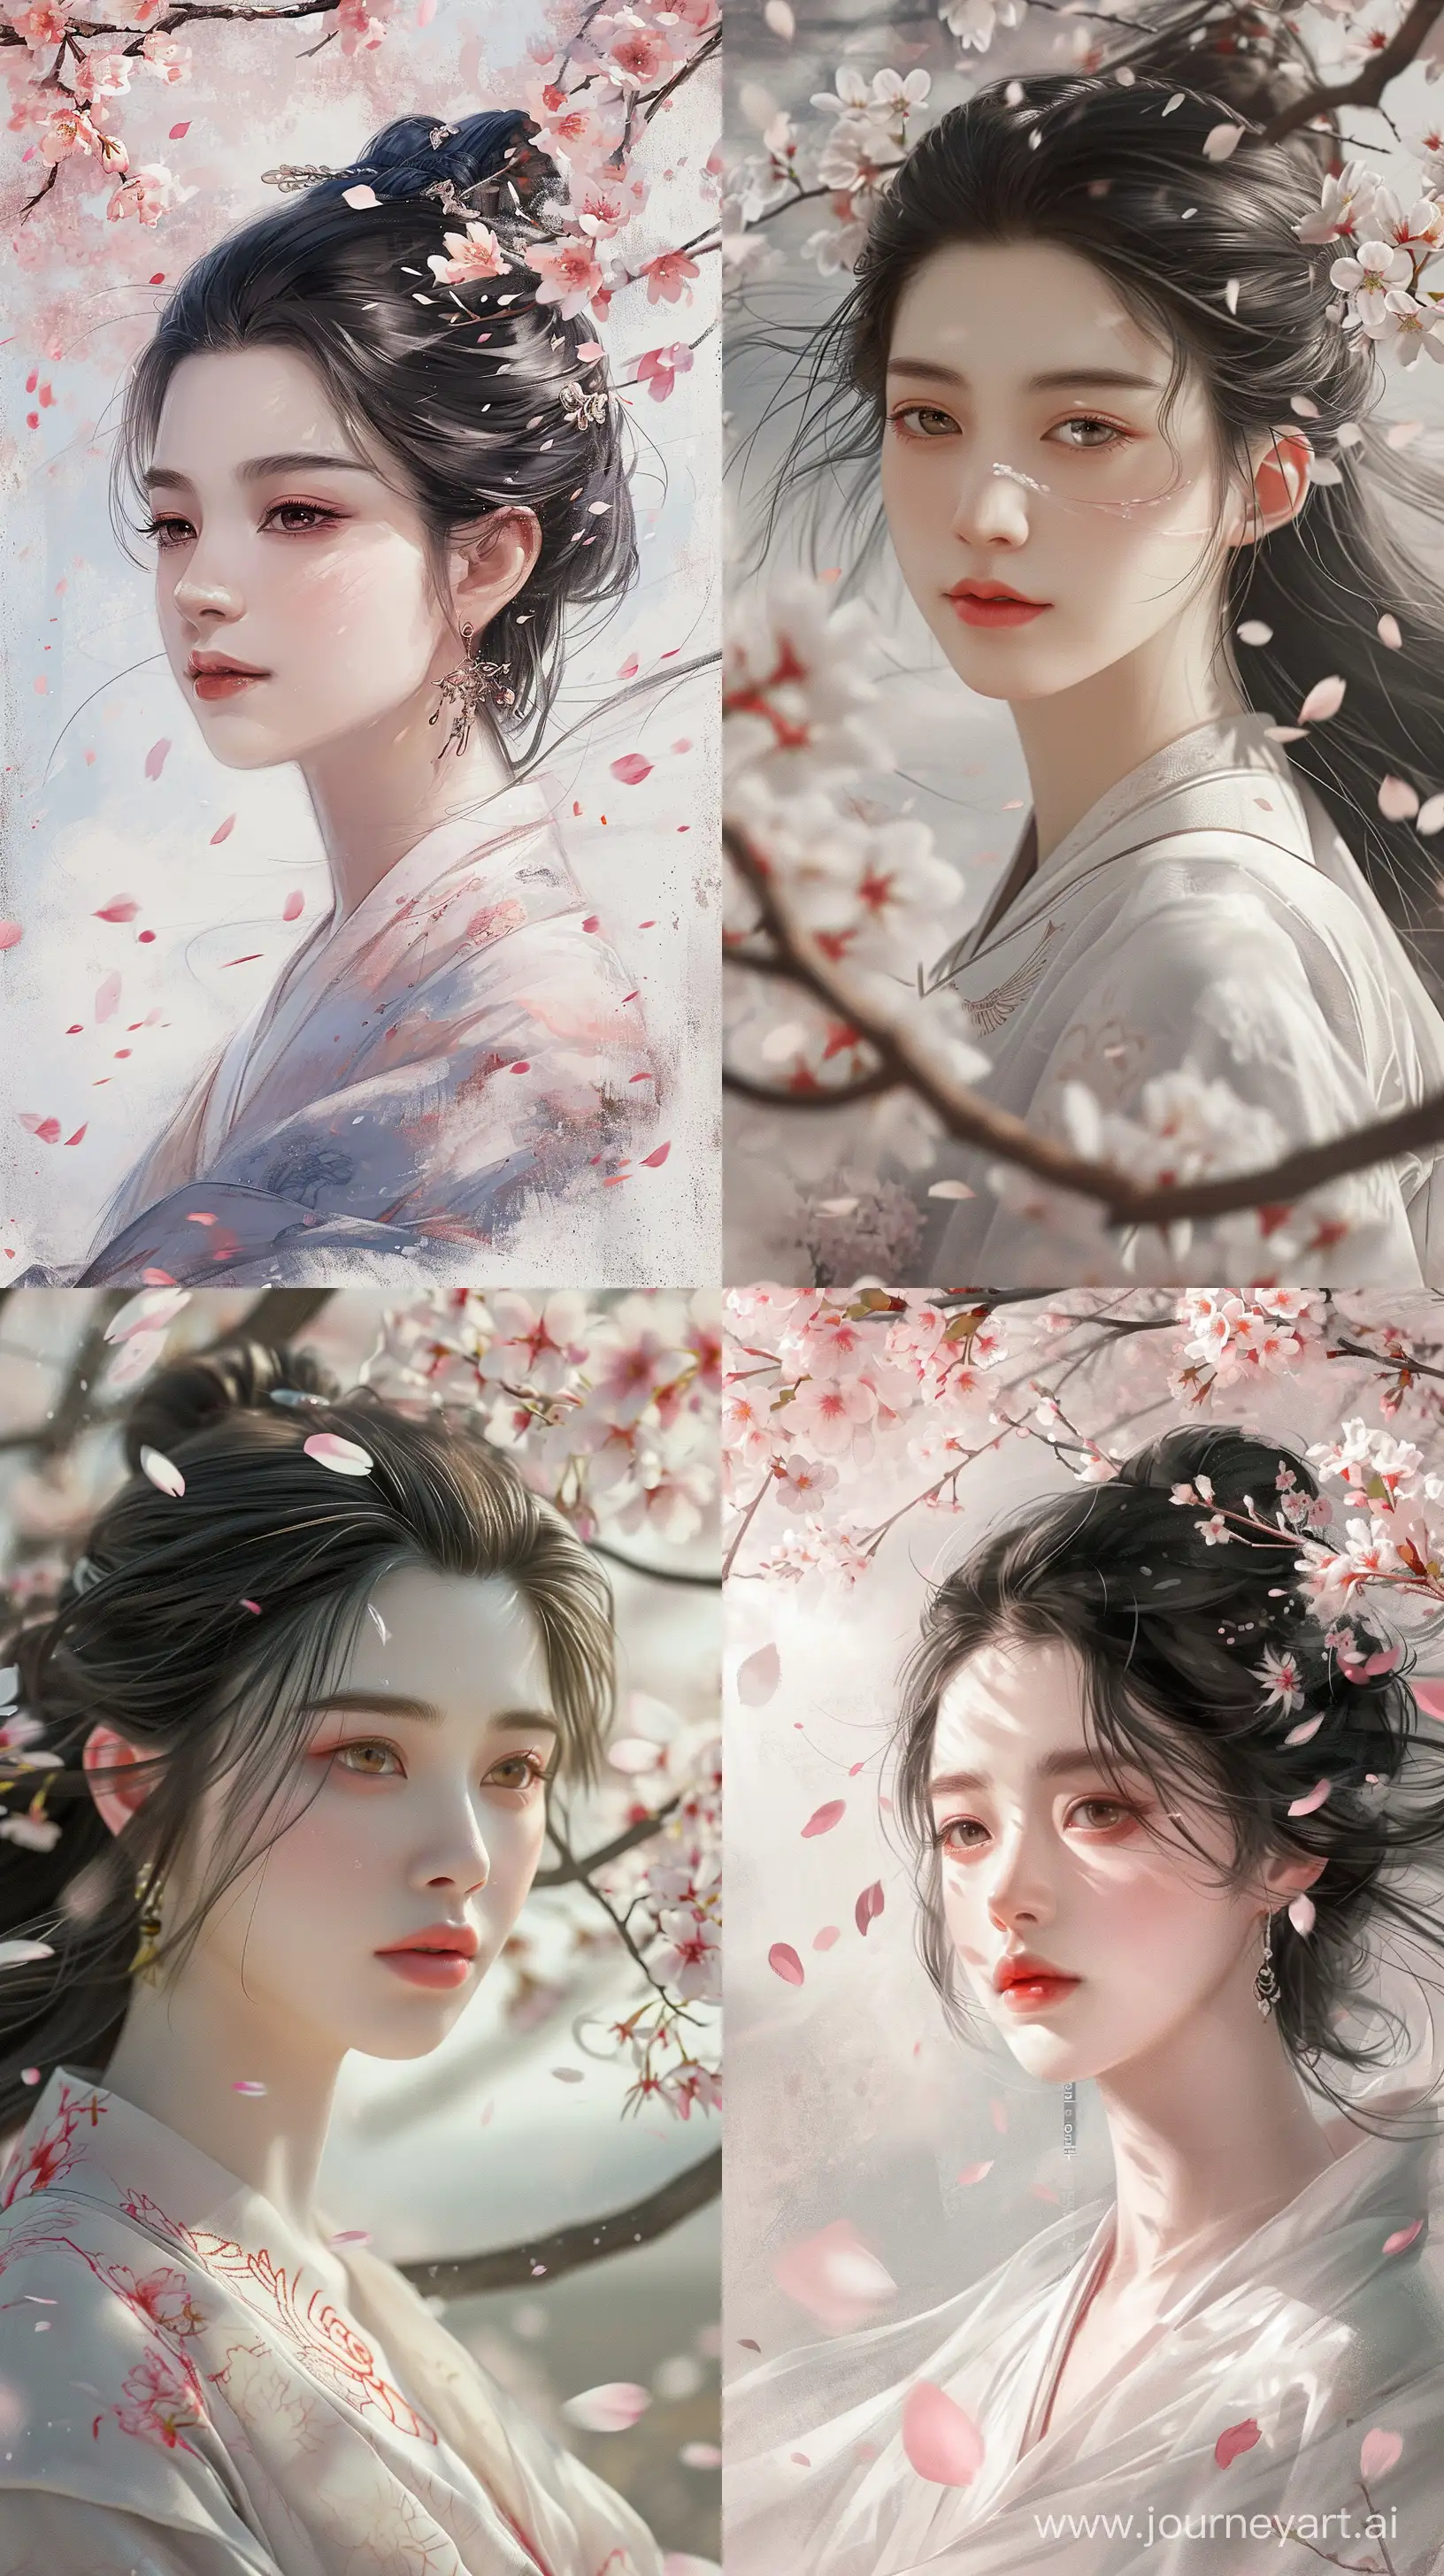 Eastern beauty with a gentle gaze, under the cherry blossoms. Capture the falling petals in the wind. Use ink wash technique for delicate transitions, accentuating the soft morning light and pastel palette. Portrait aspect ratio, refine details, --ar 9:16